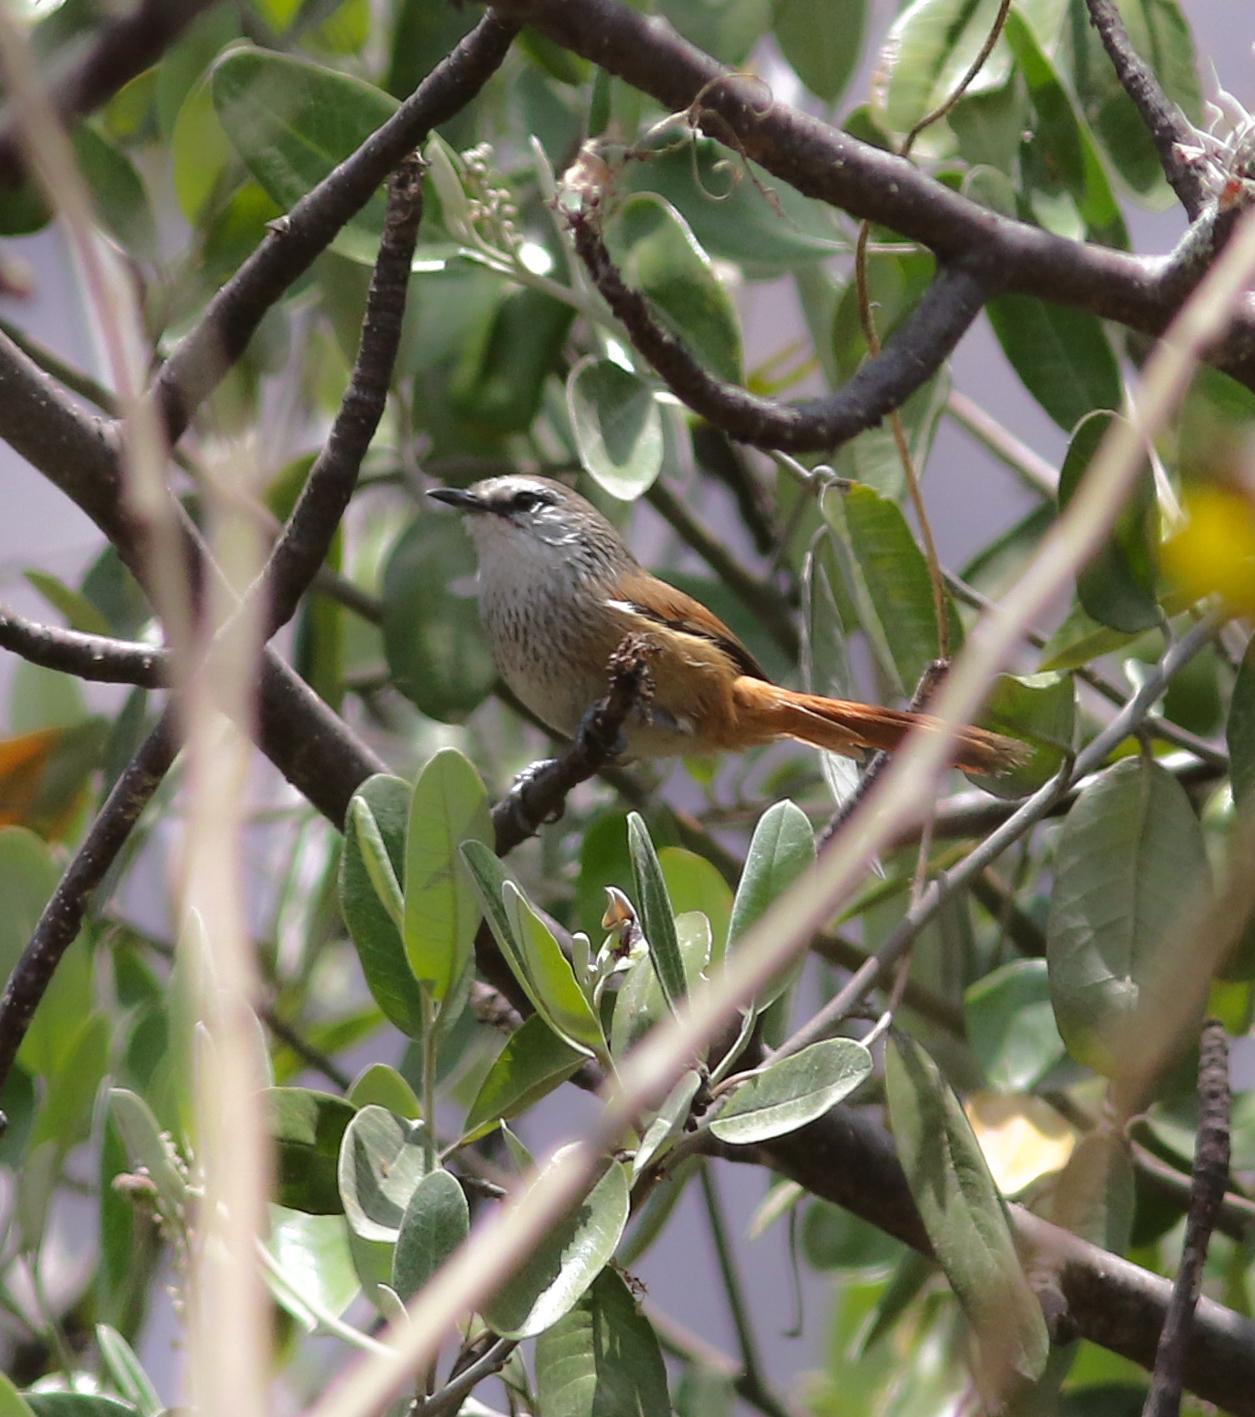 Necklaced Spinetail Photo by Leonardo Garrigues